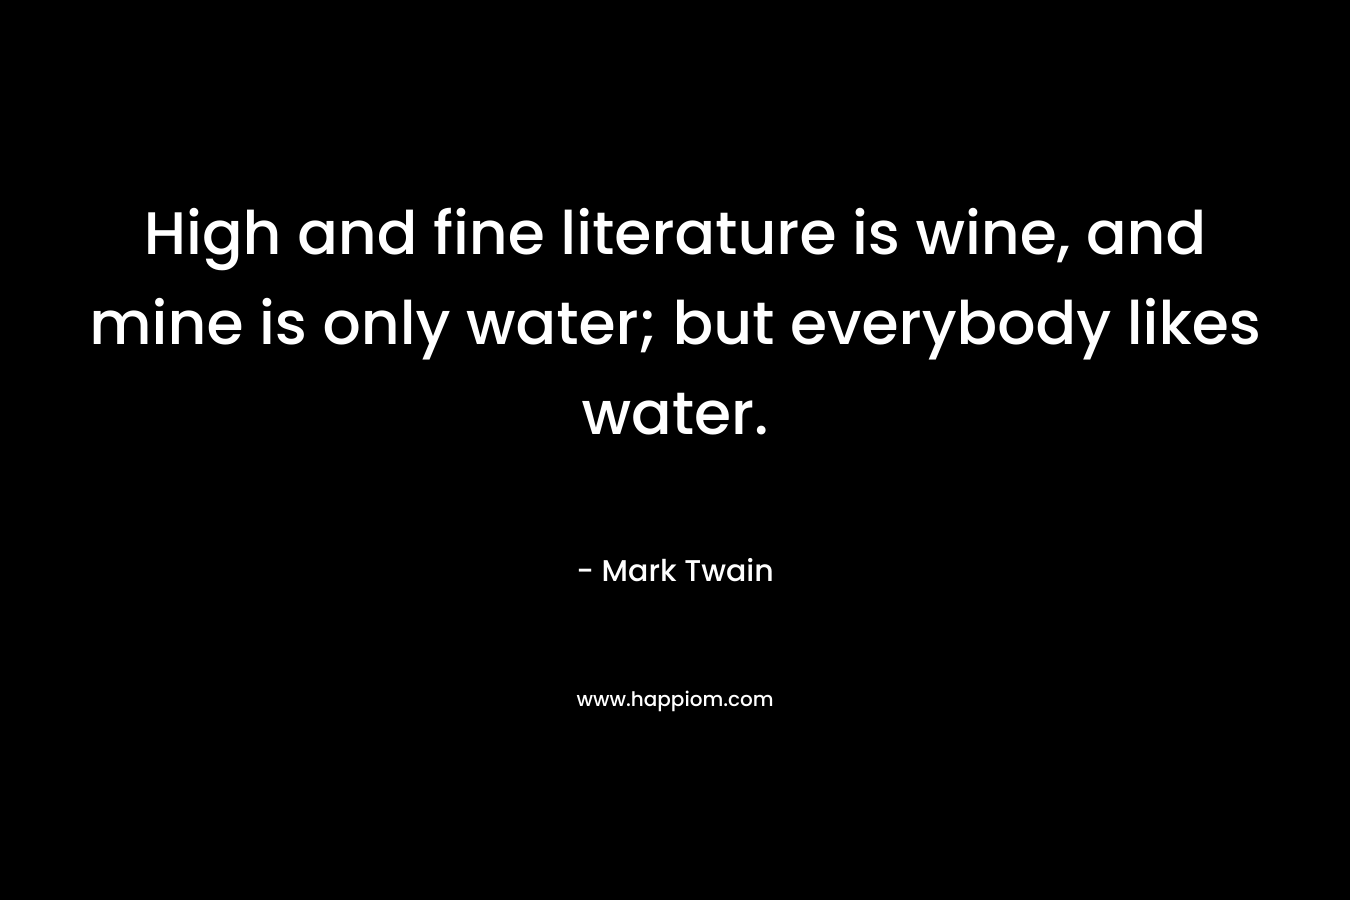 High and fine literature is wine, and mine is only water; but everybody likes water.